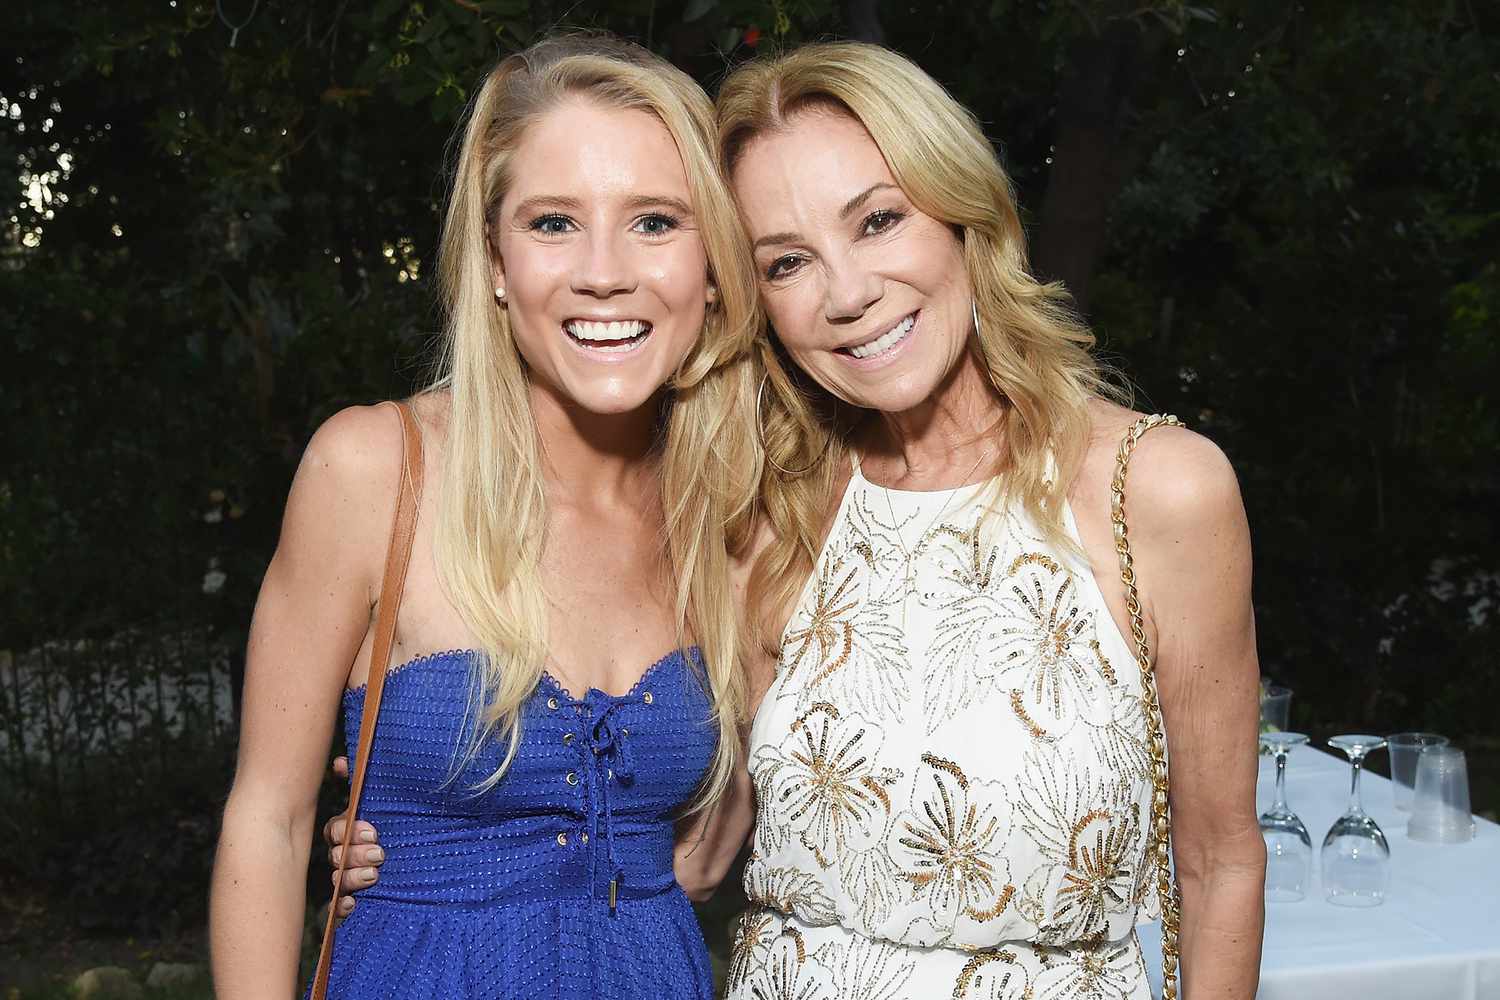 Cassidy Gifford and Kathie Lee Gifford